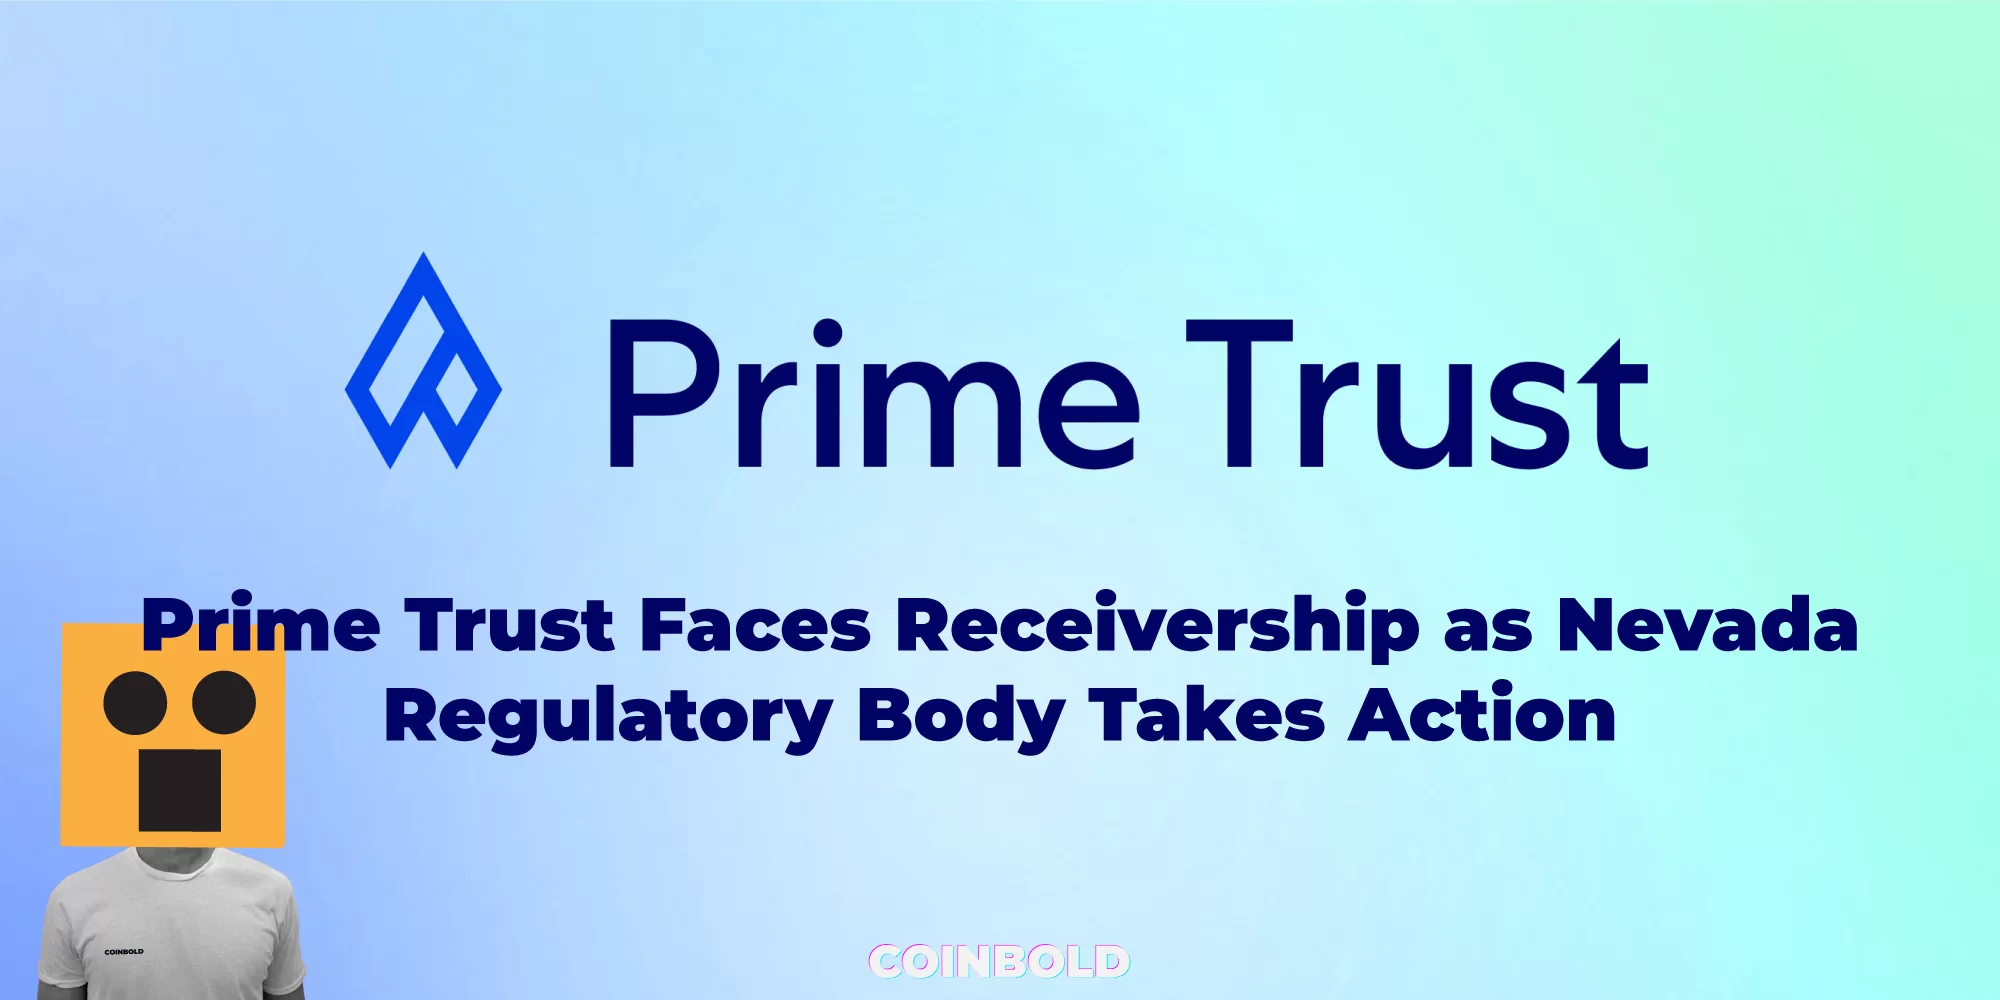 Prime Trust Faces Receivership as Nevada Regulatory Body Takes Action